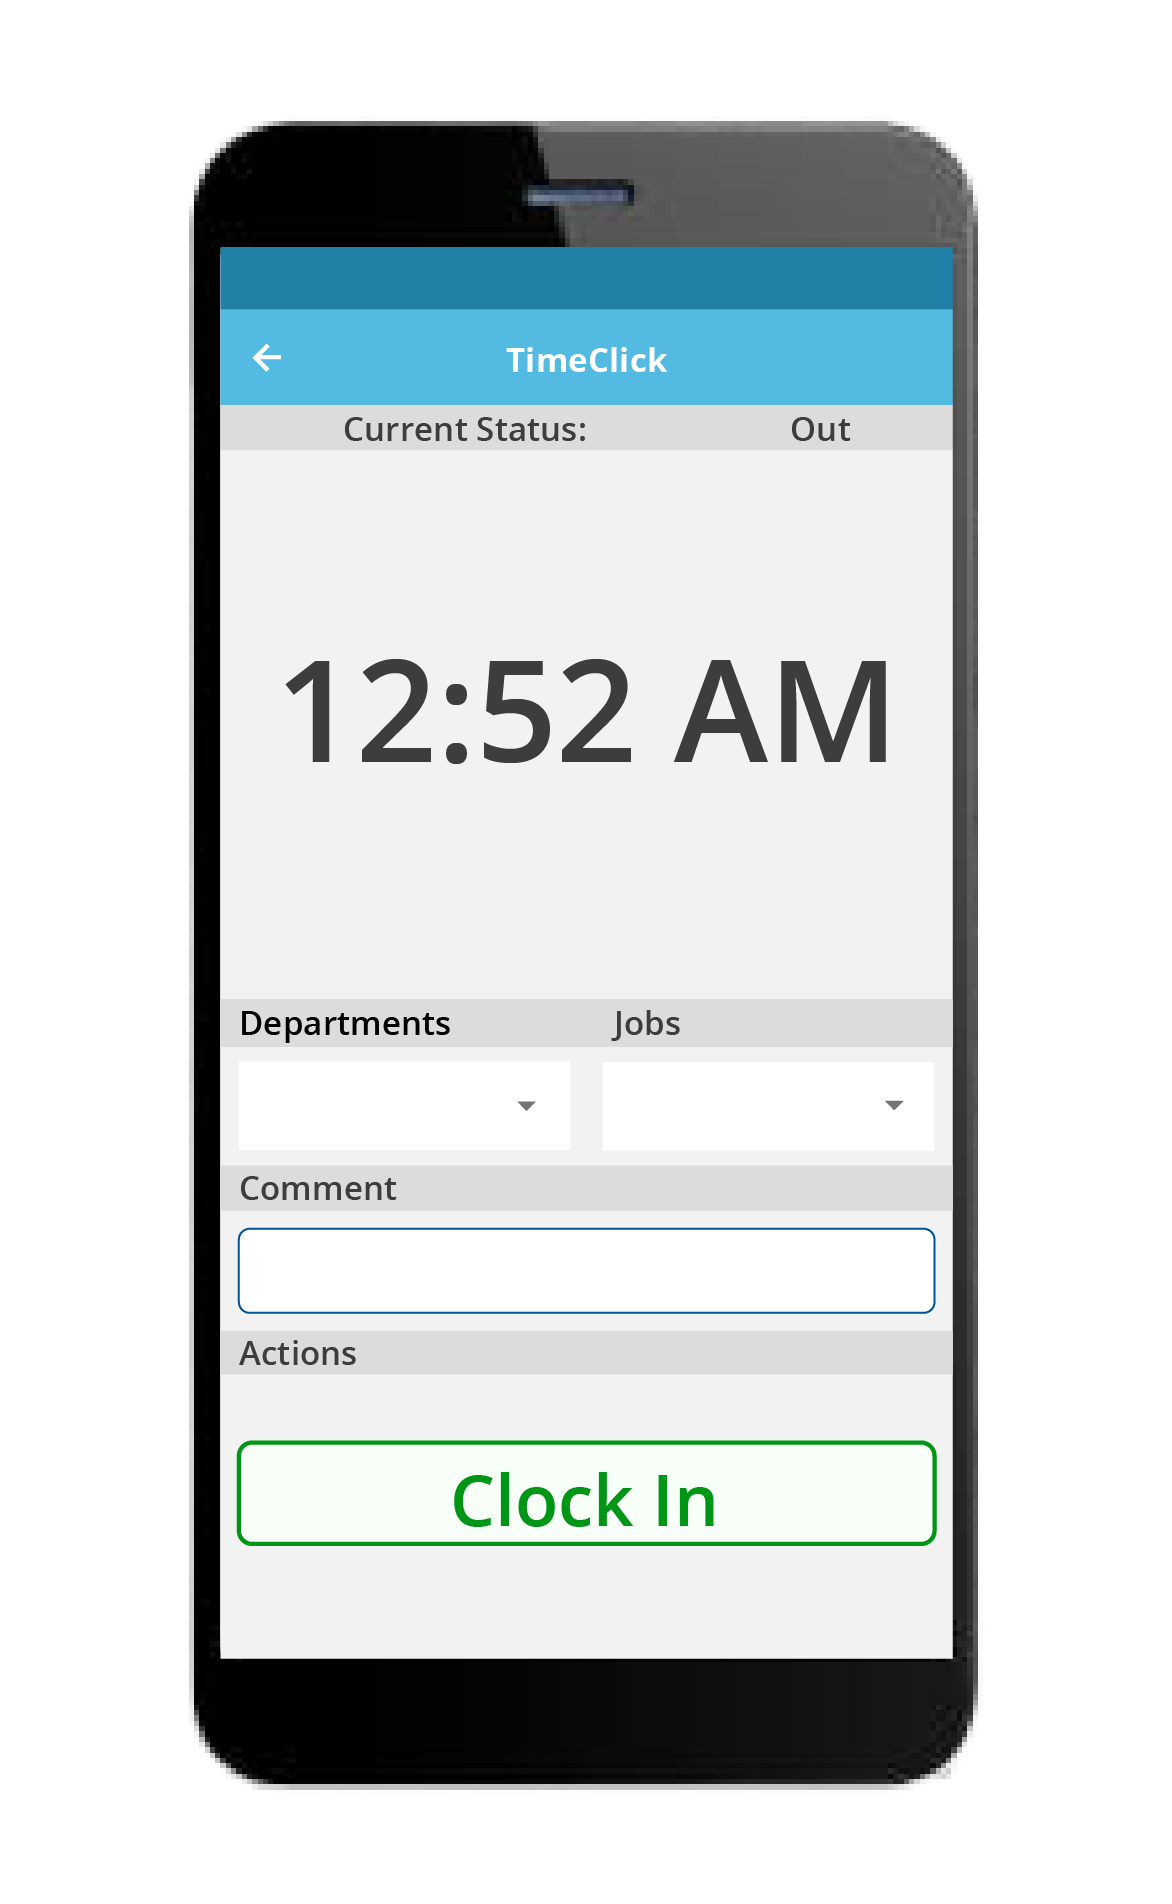 TimeClick Software - TimeClick's mobile app allows for clocking in and out for the staff of yours that works remotely and on the go.